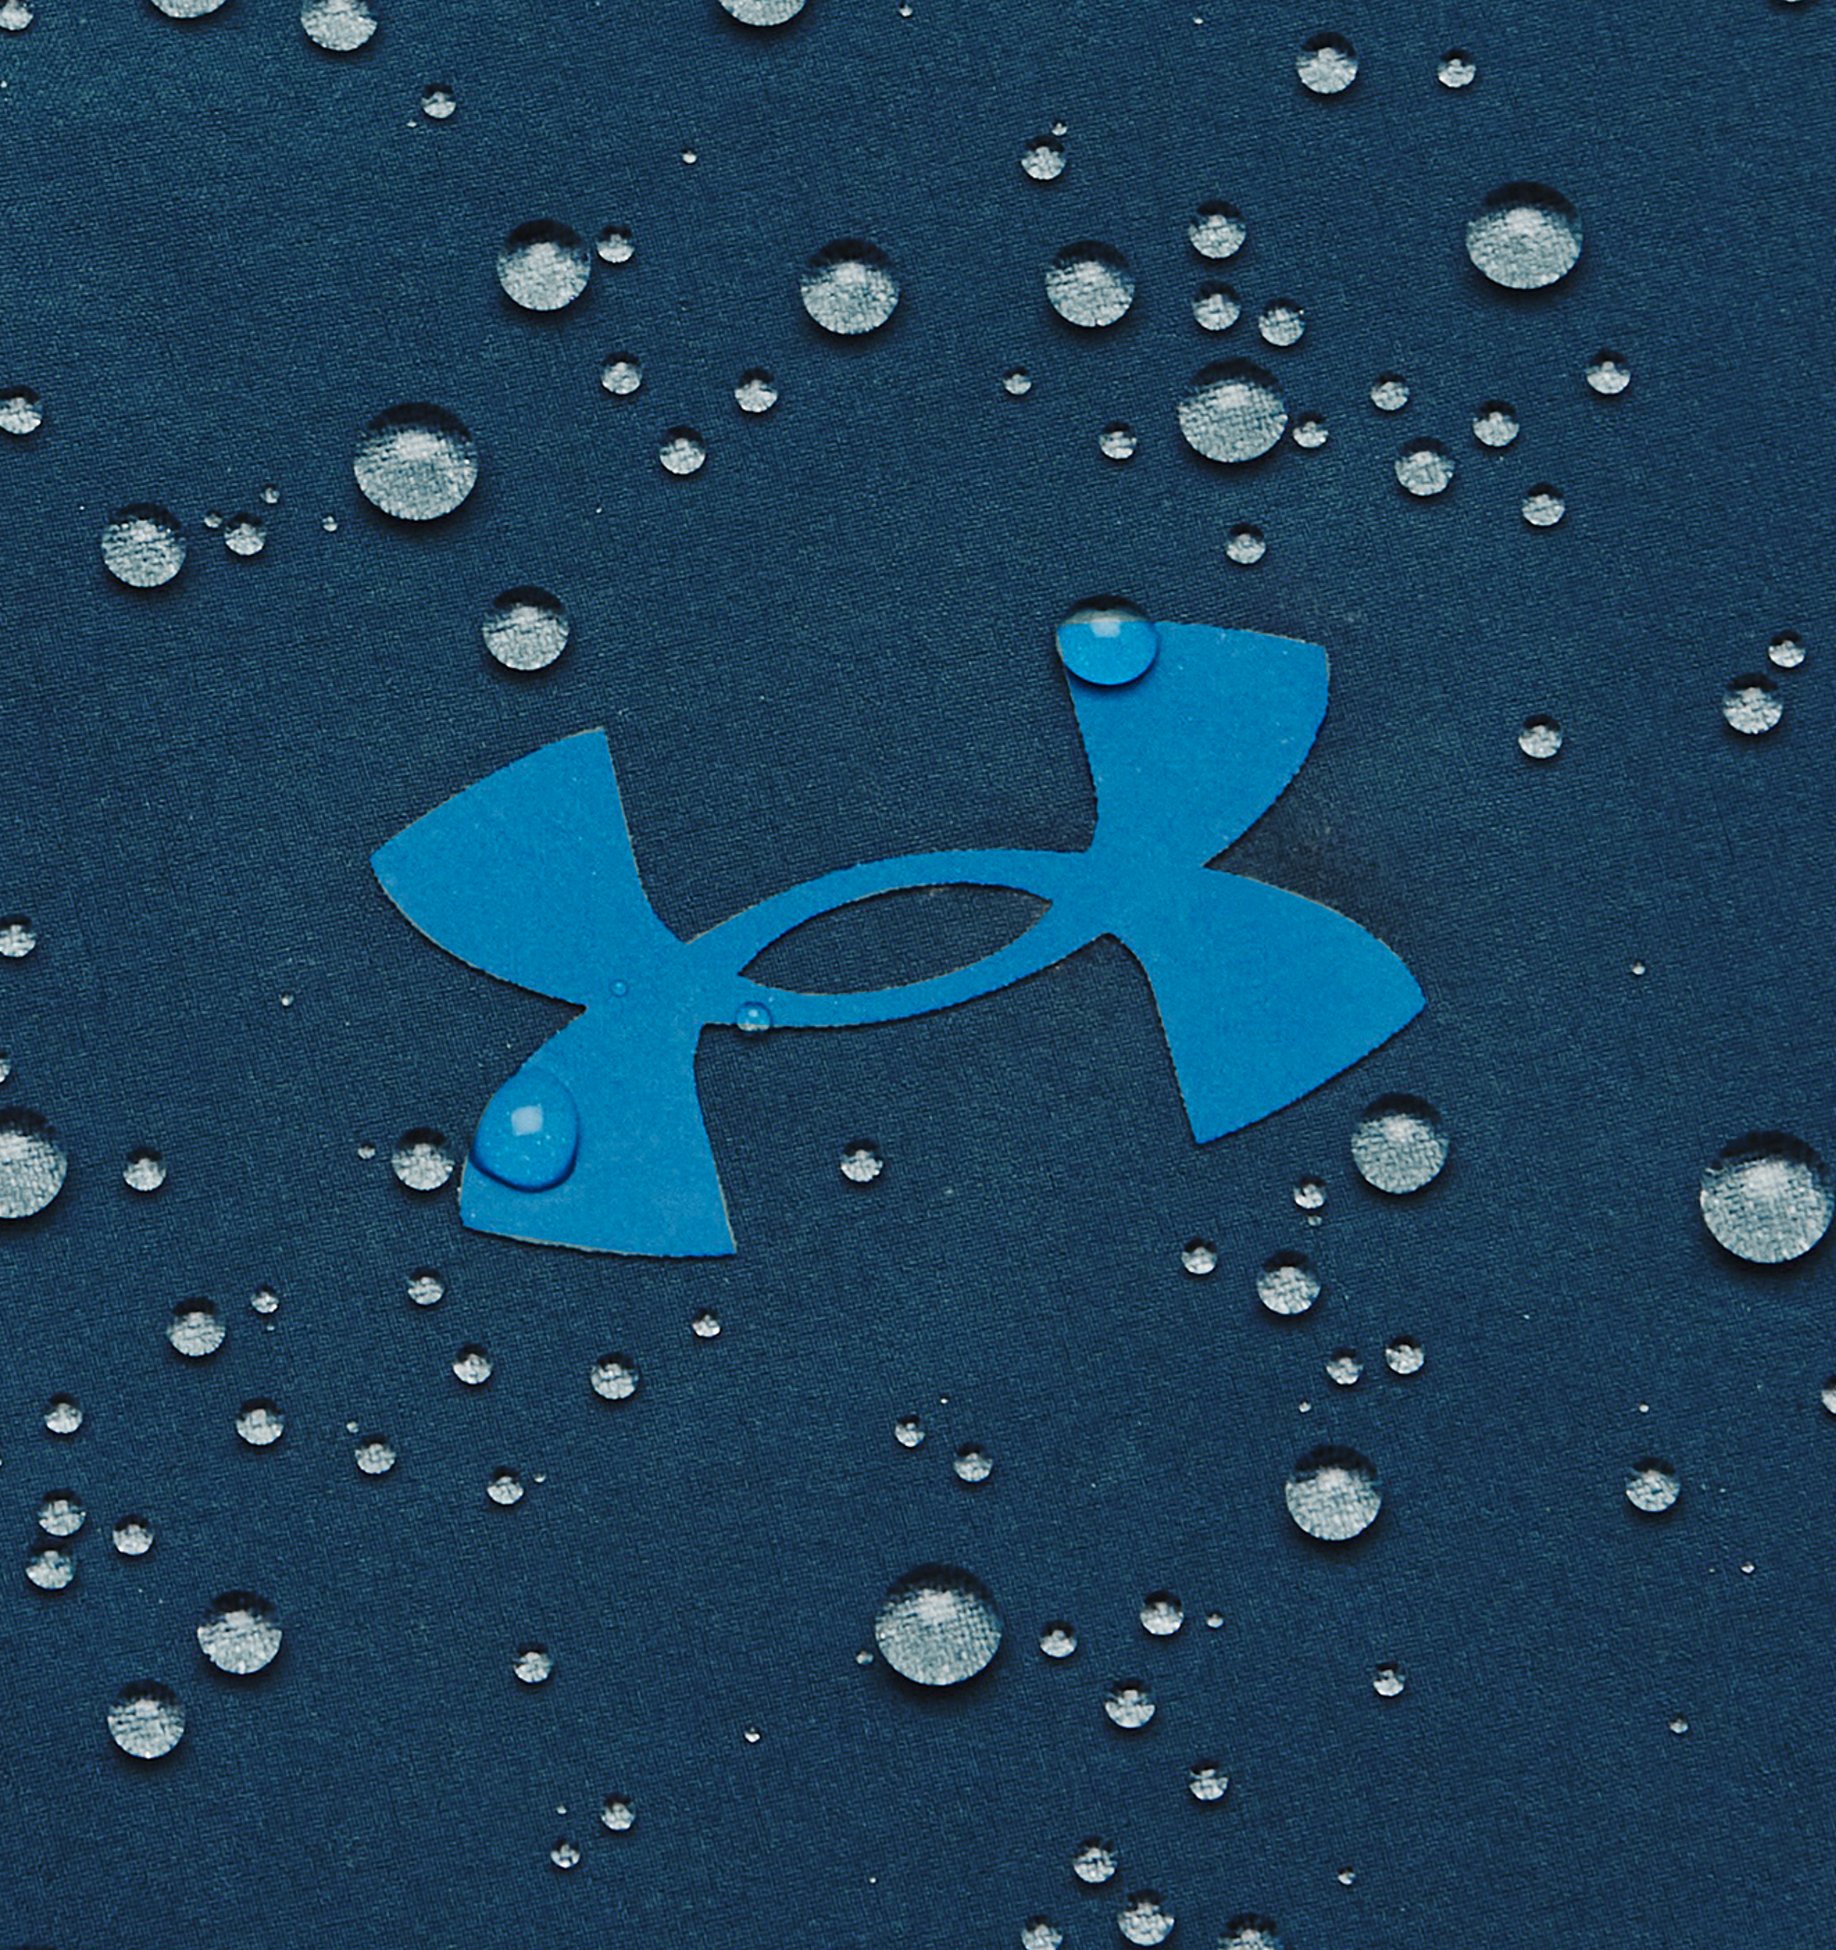 UA The Pace Pants Under Armour